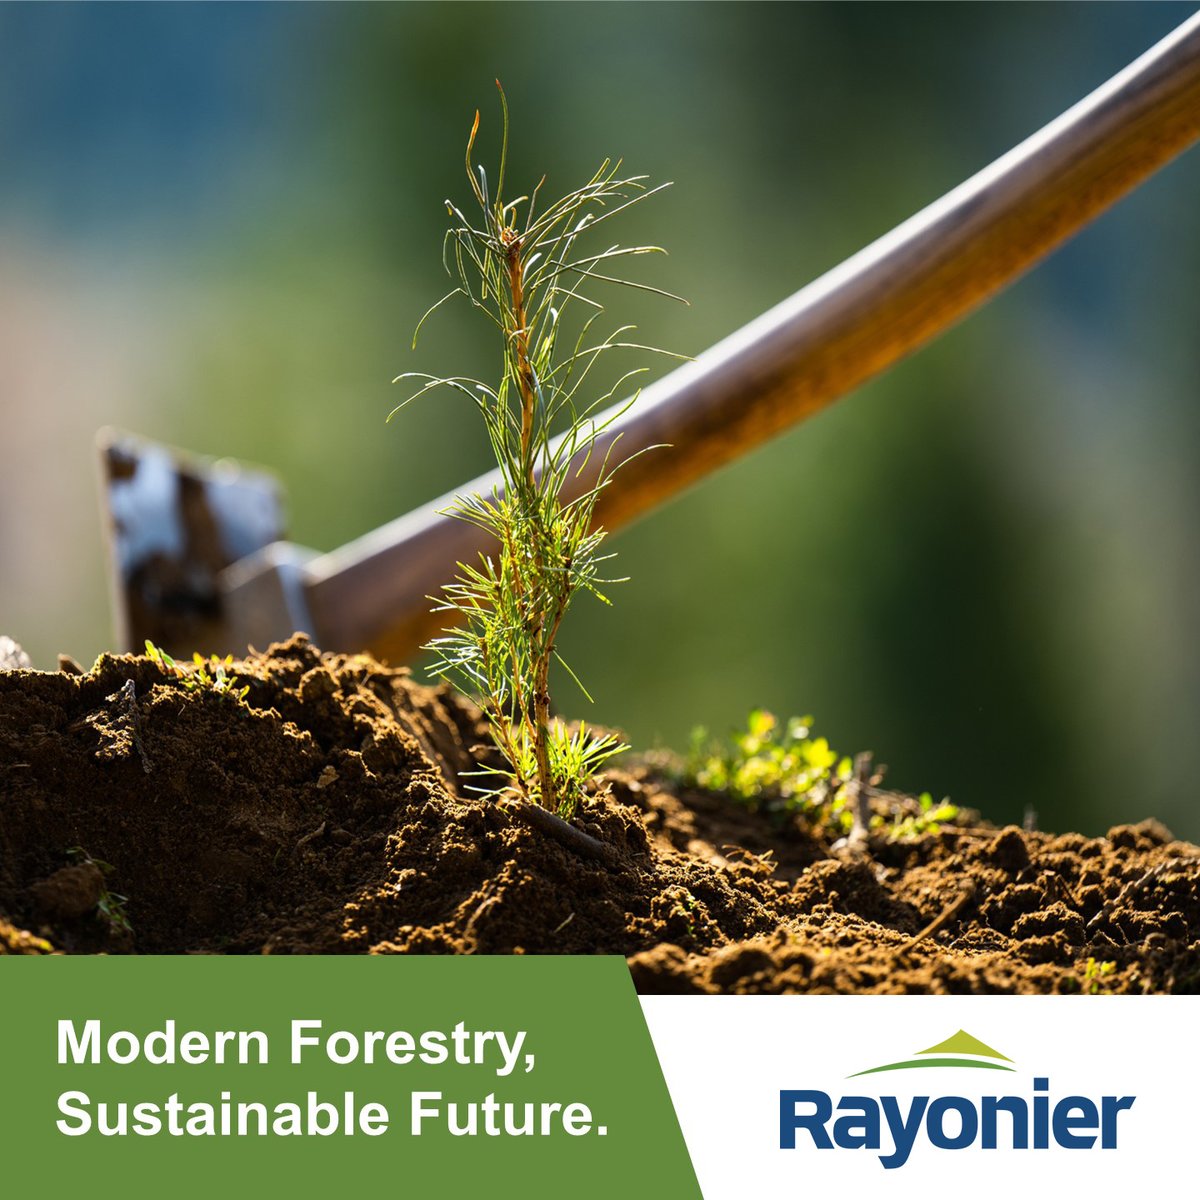 Modern forestry achieves sustainability through continuous cycles of growth, harvests & regrowth. This creates a mosaic of forest age & size classes across the landscape, which is beneficial for wildlife, water quality & carbon sequestration. Learn more: hubs.ly/Q02sJPD70